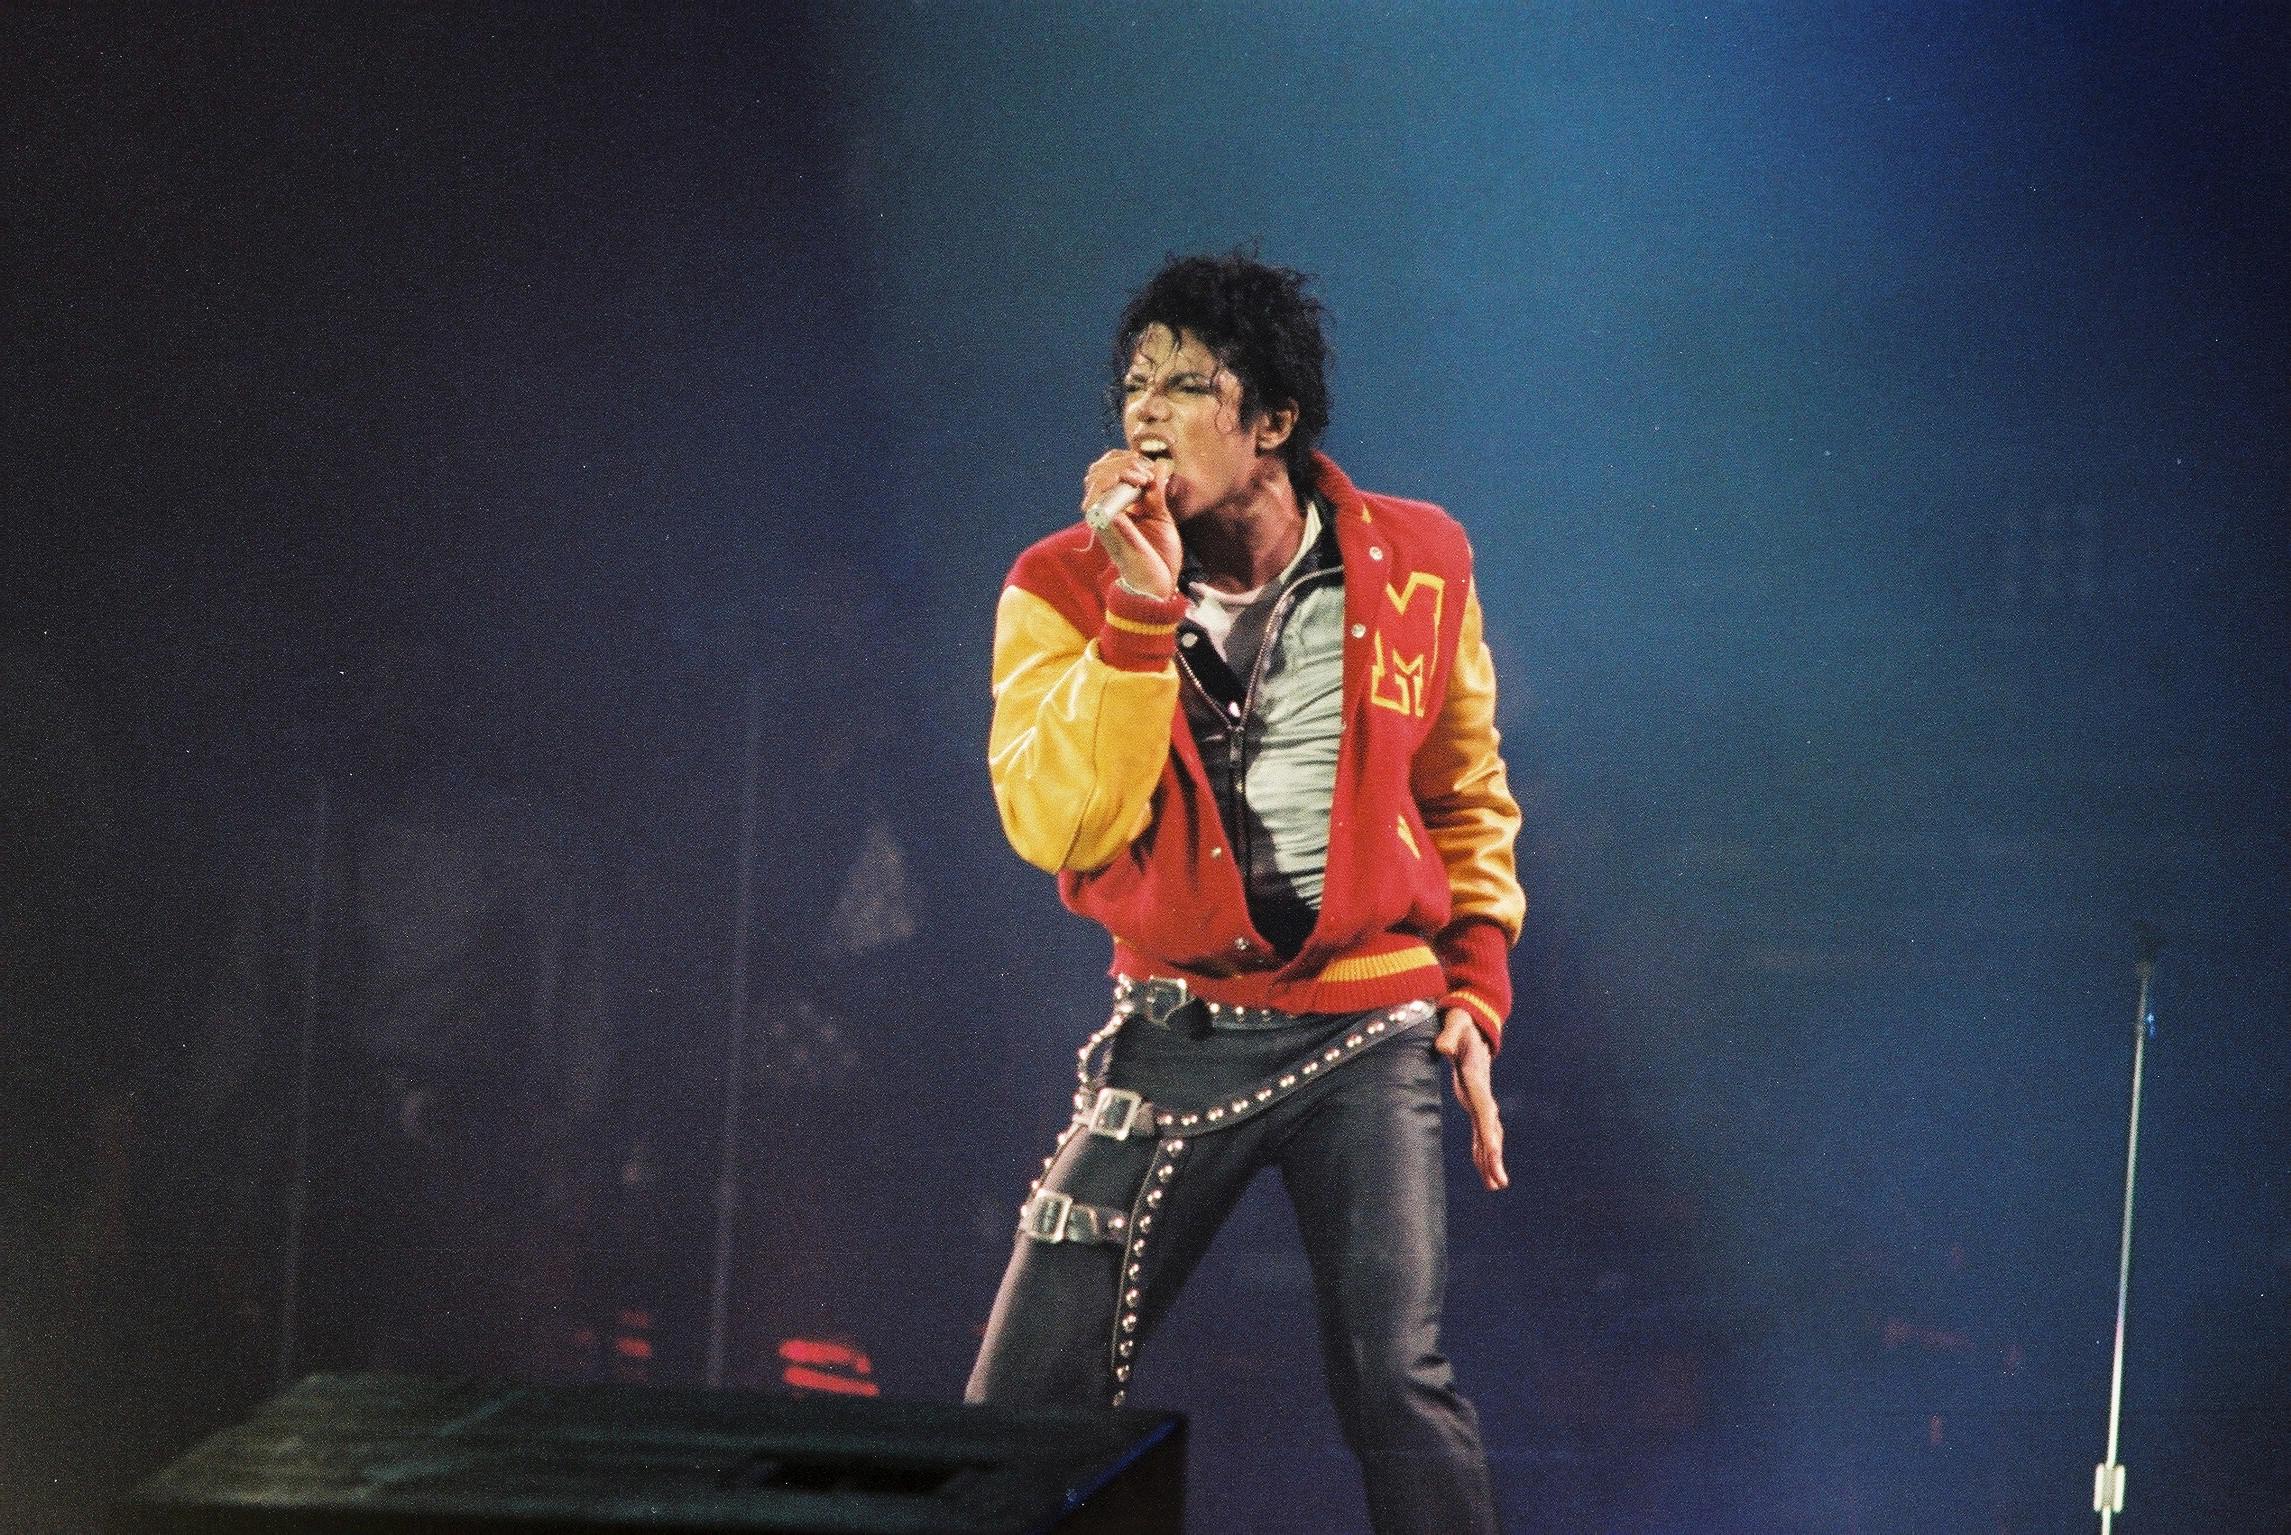 6 Of The Most Expensive Pieces Of Michael Jackson Memorabilia